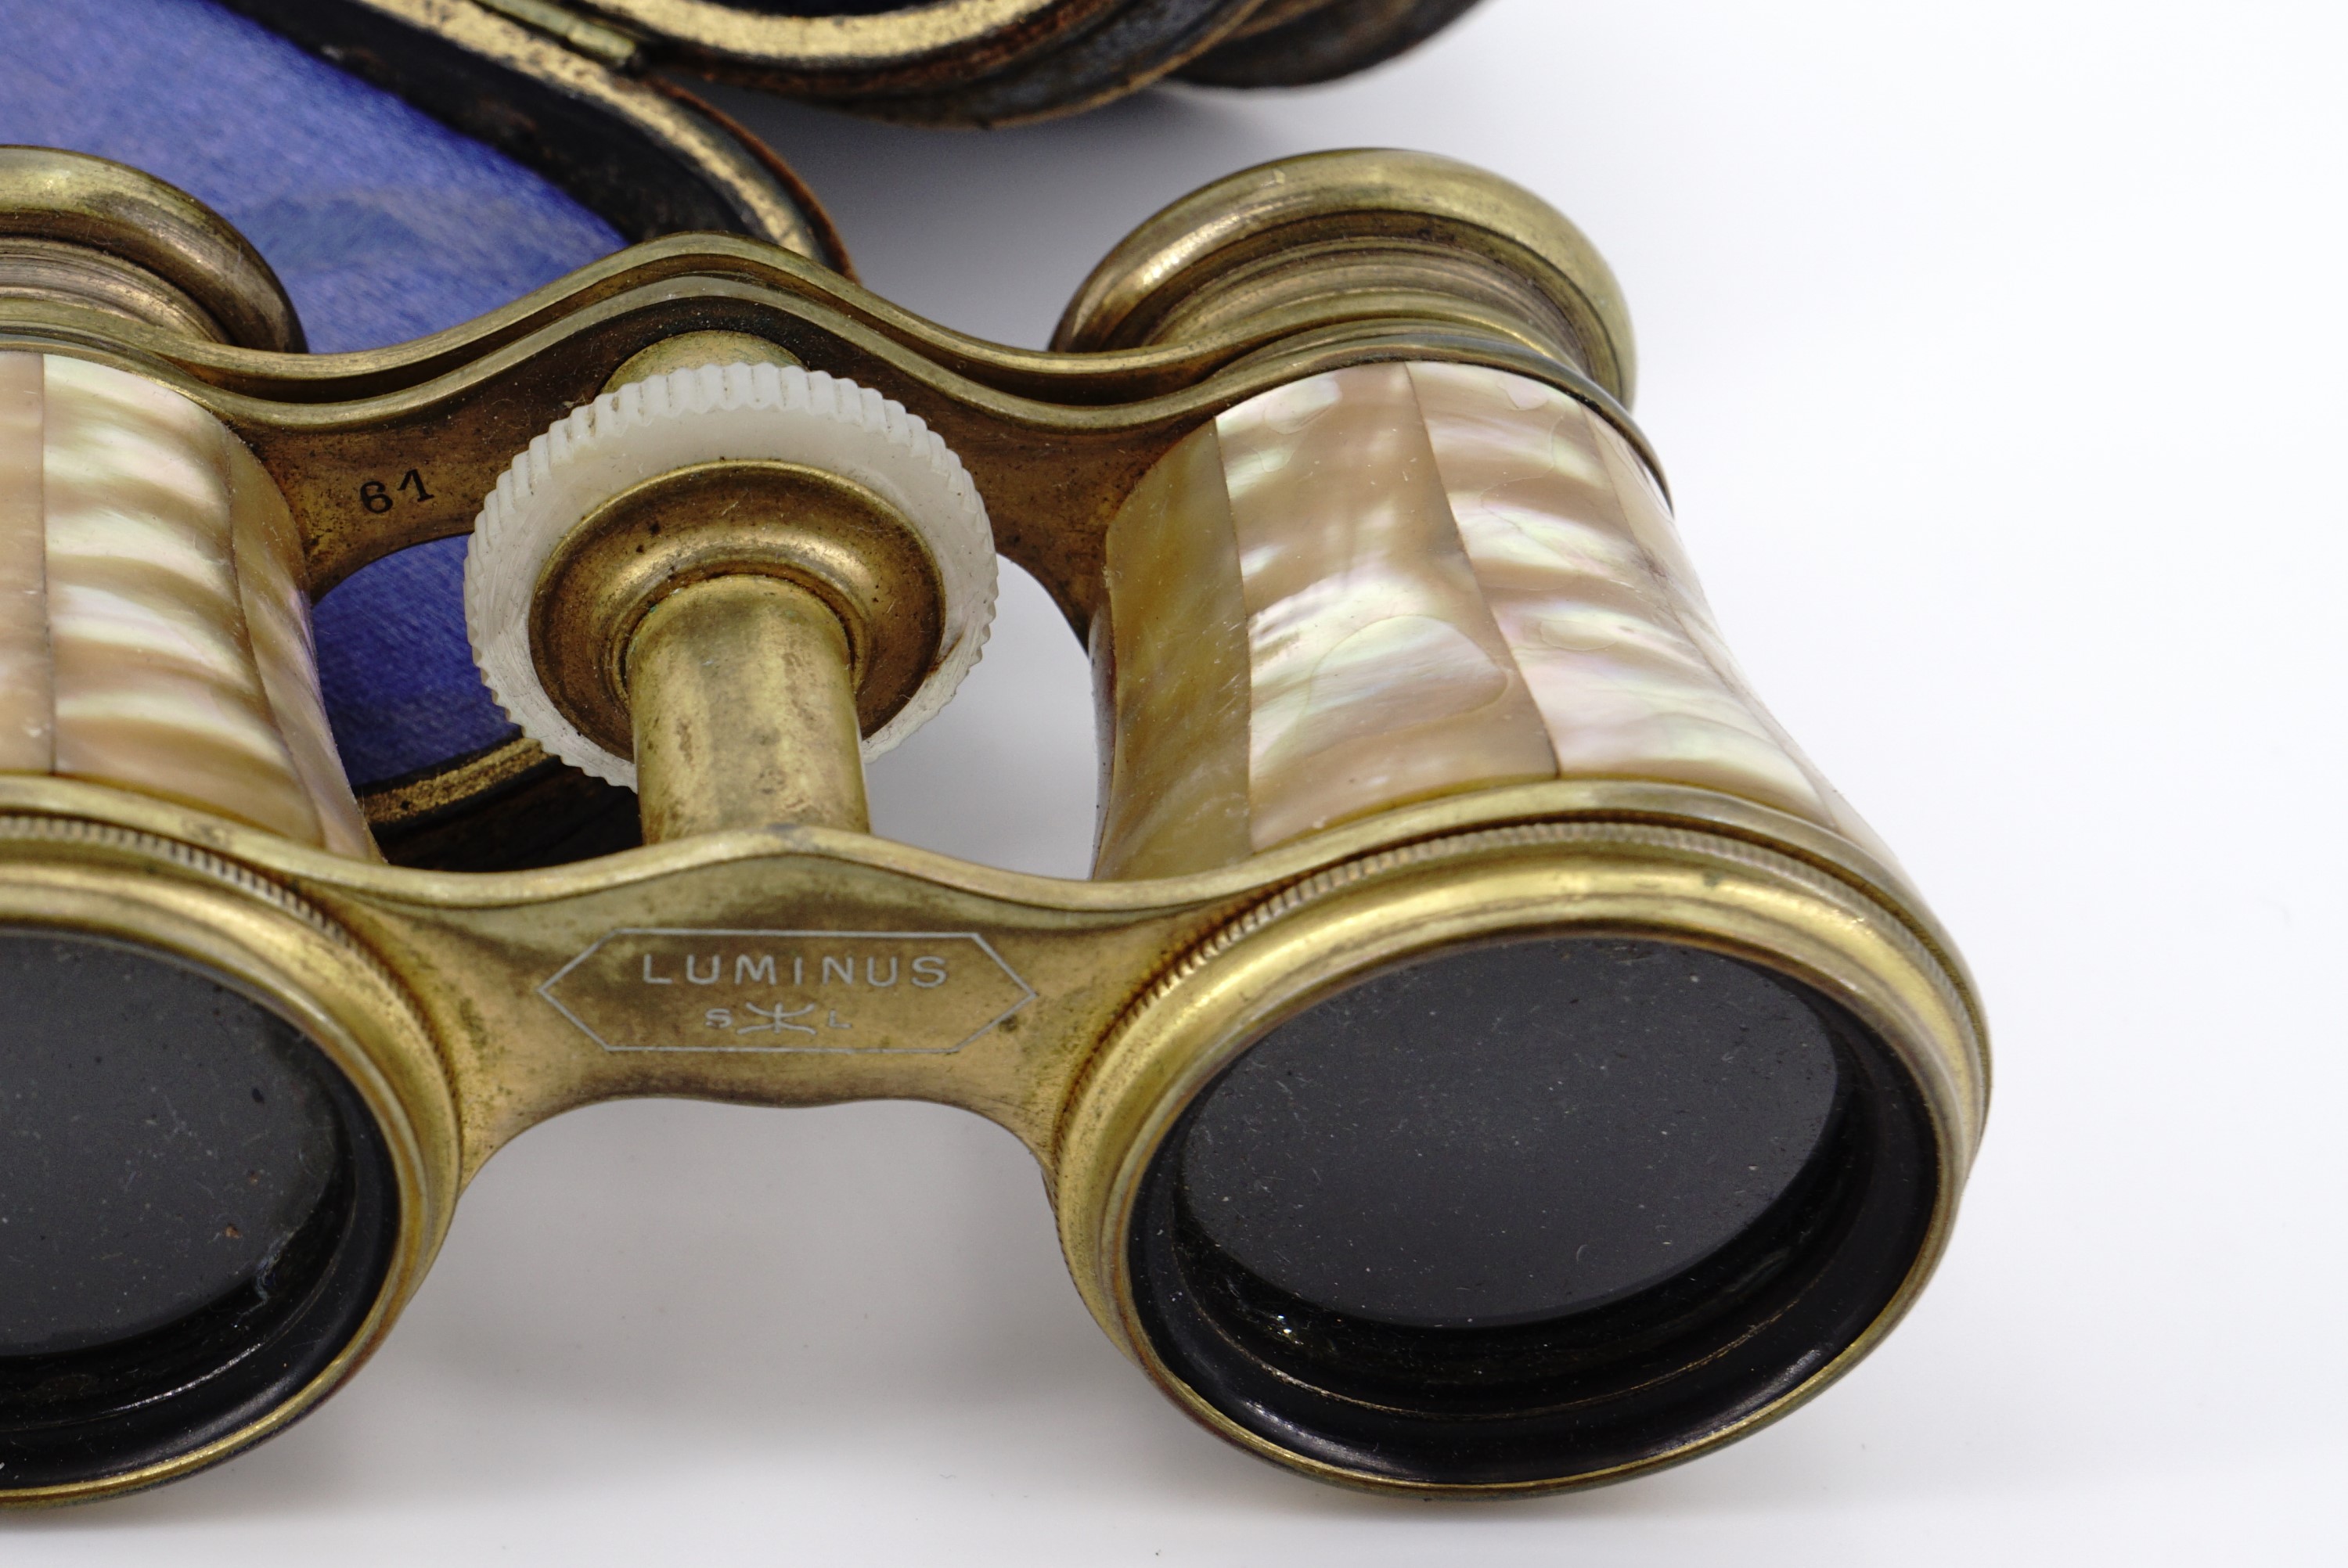 A pair of Victorian Luminus mother of pearl opera glasses - Image 2 of 3